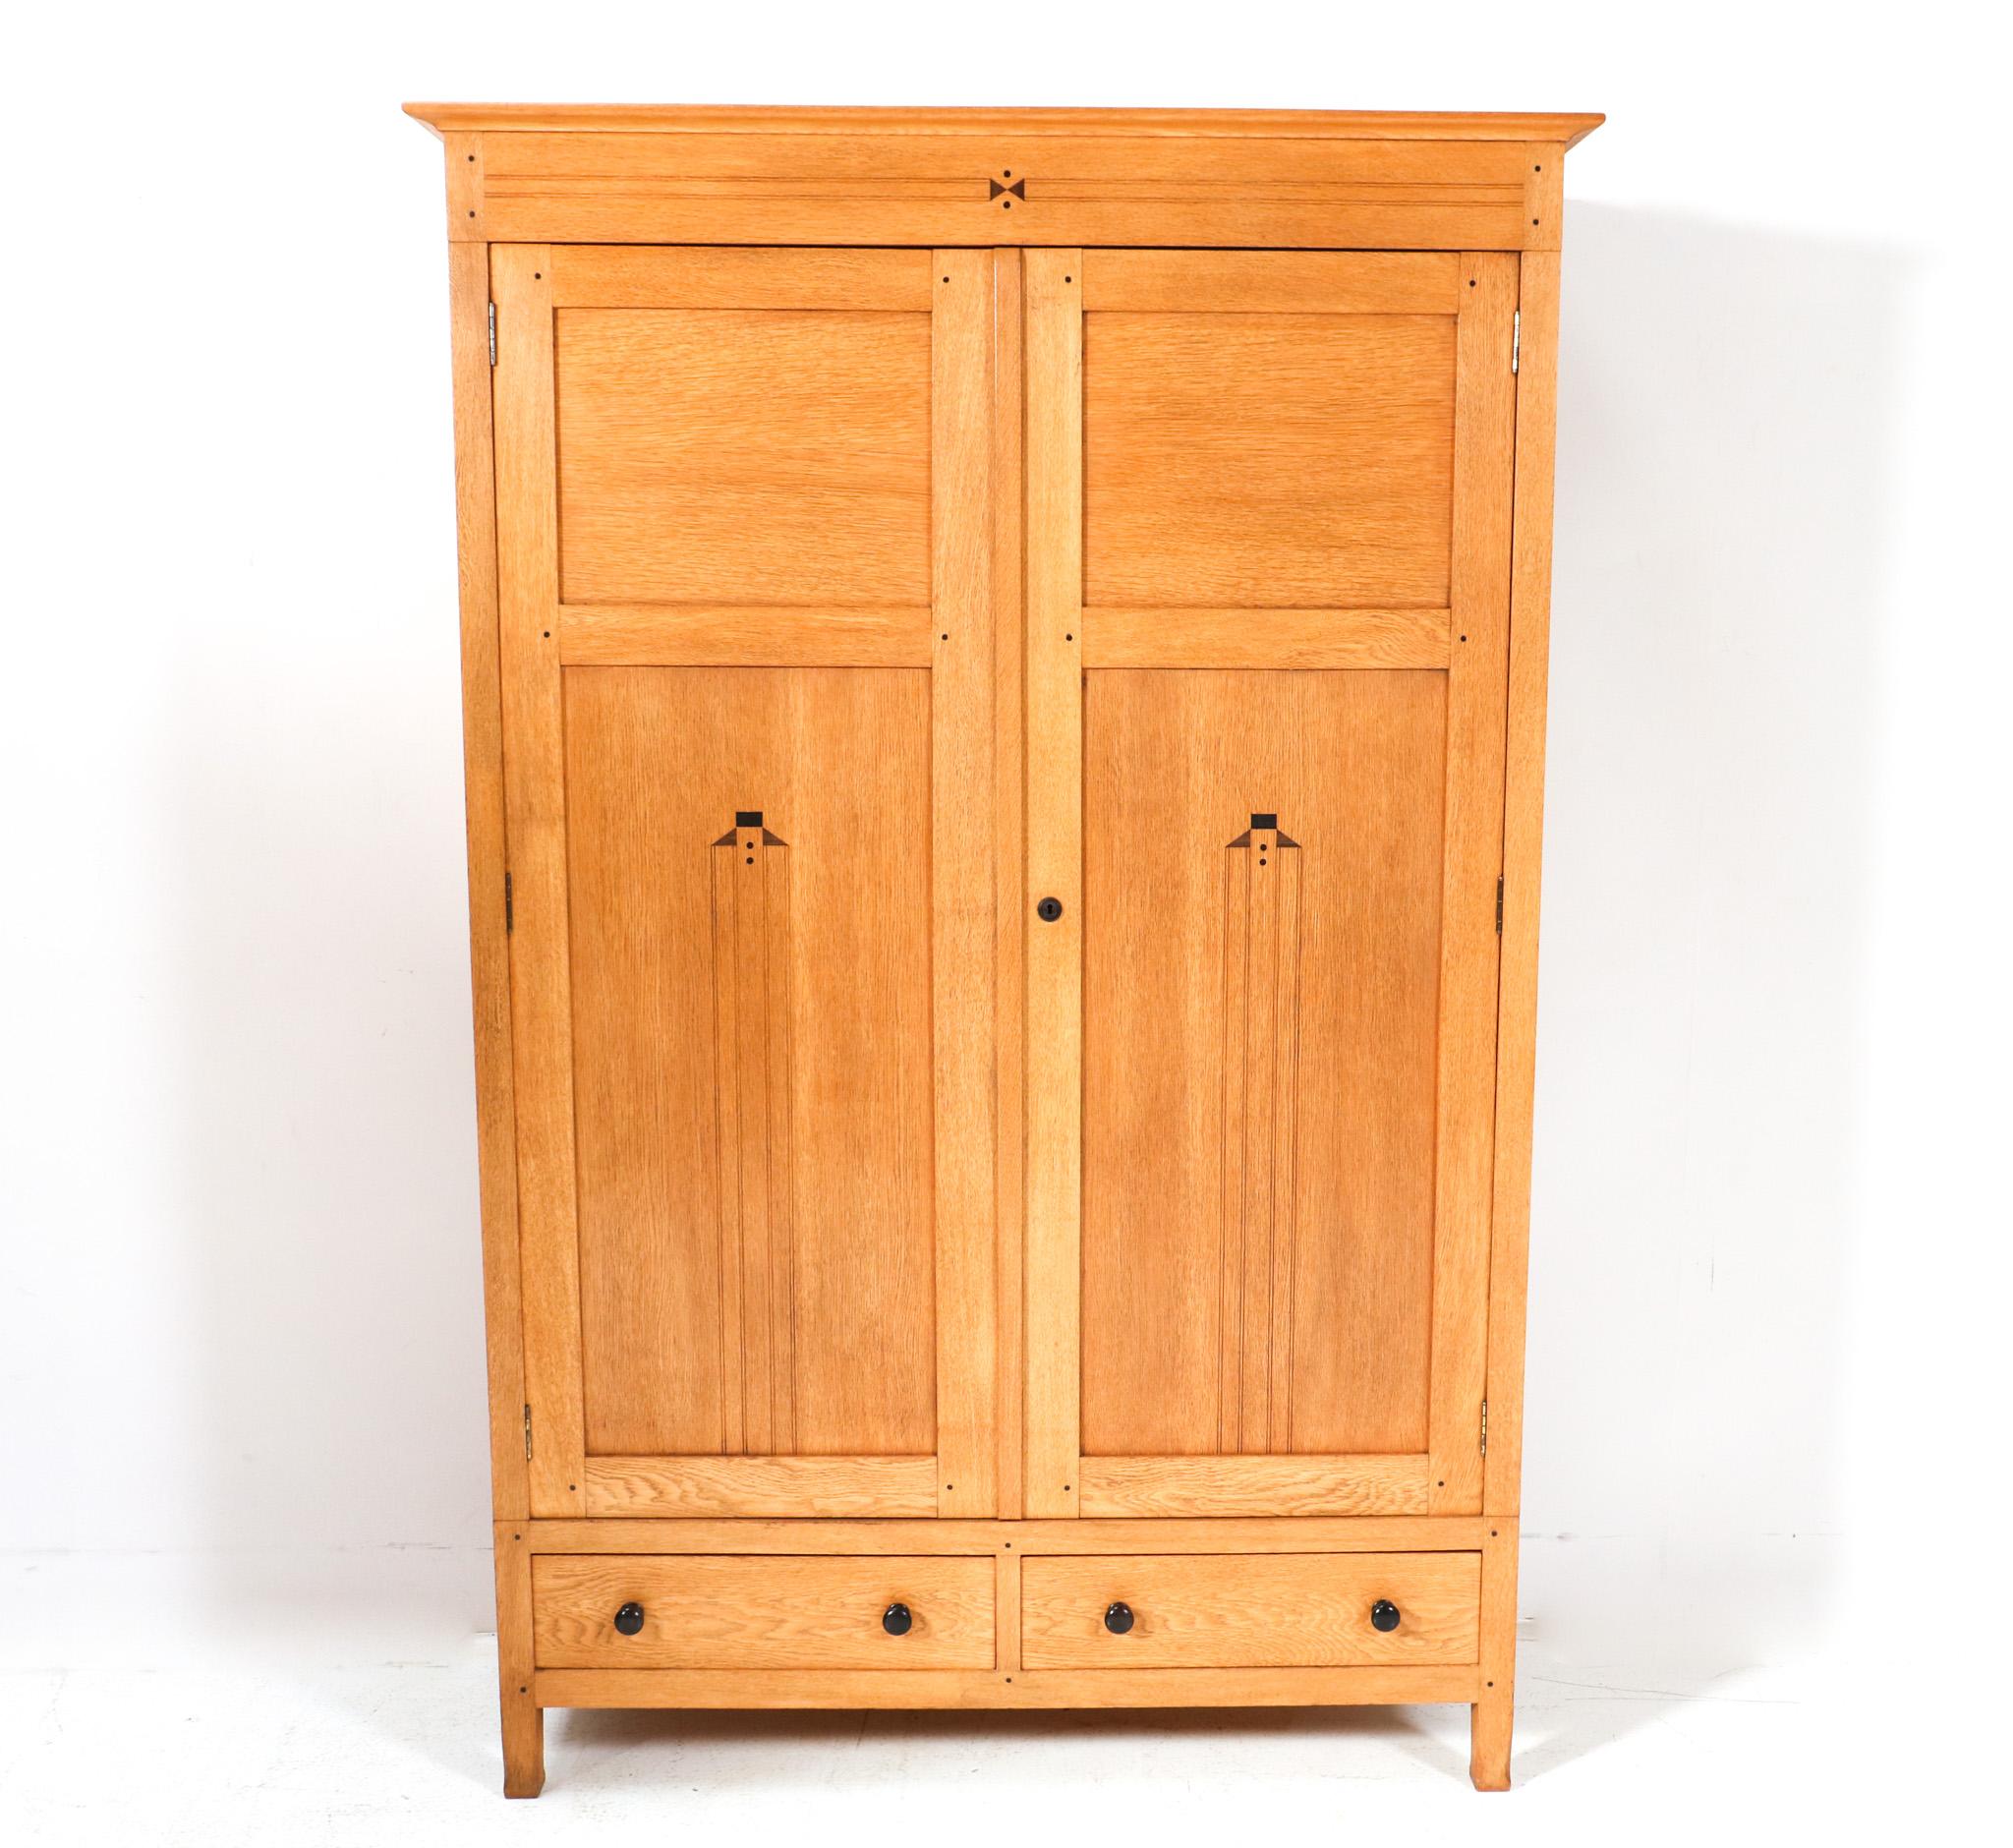 Oak Arts & Crafts Art Nouveau Armoire or Wardrobe by Jac. van den Bosch, 1904 In Good Condition For Sale In Amsterdam, NL